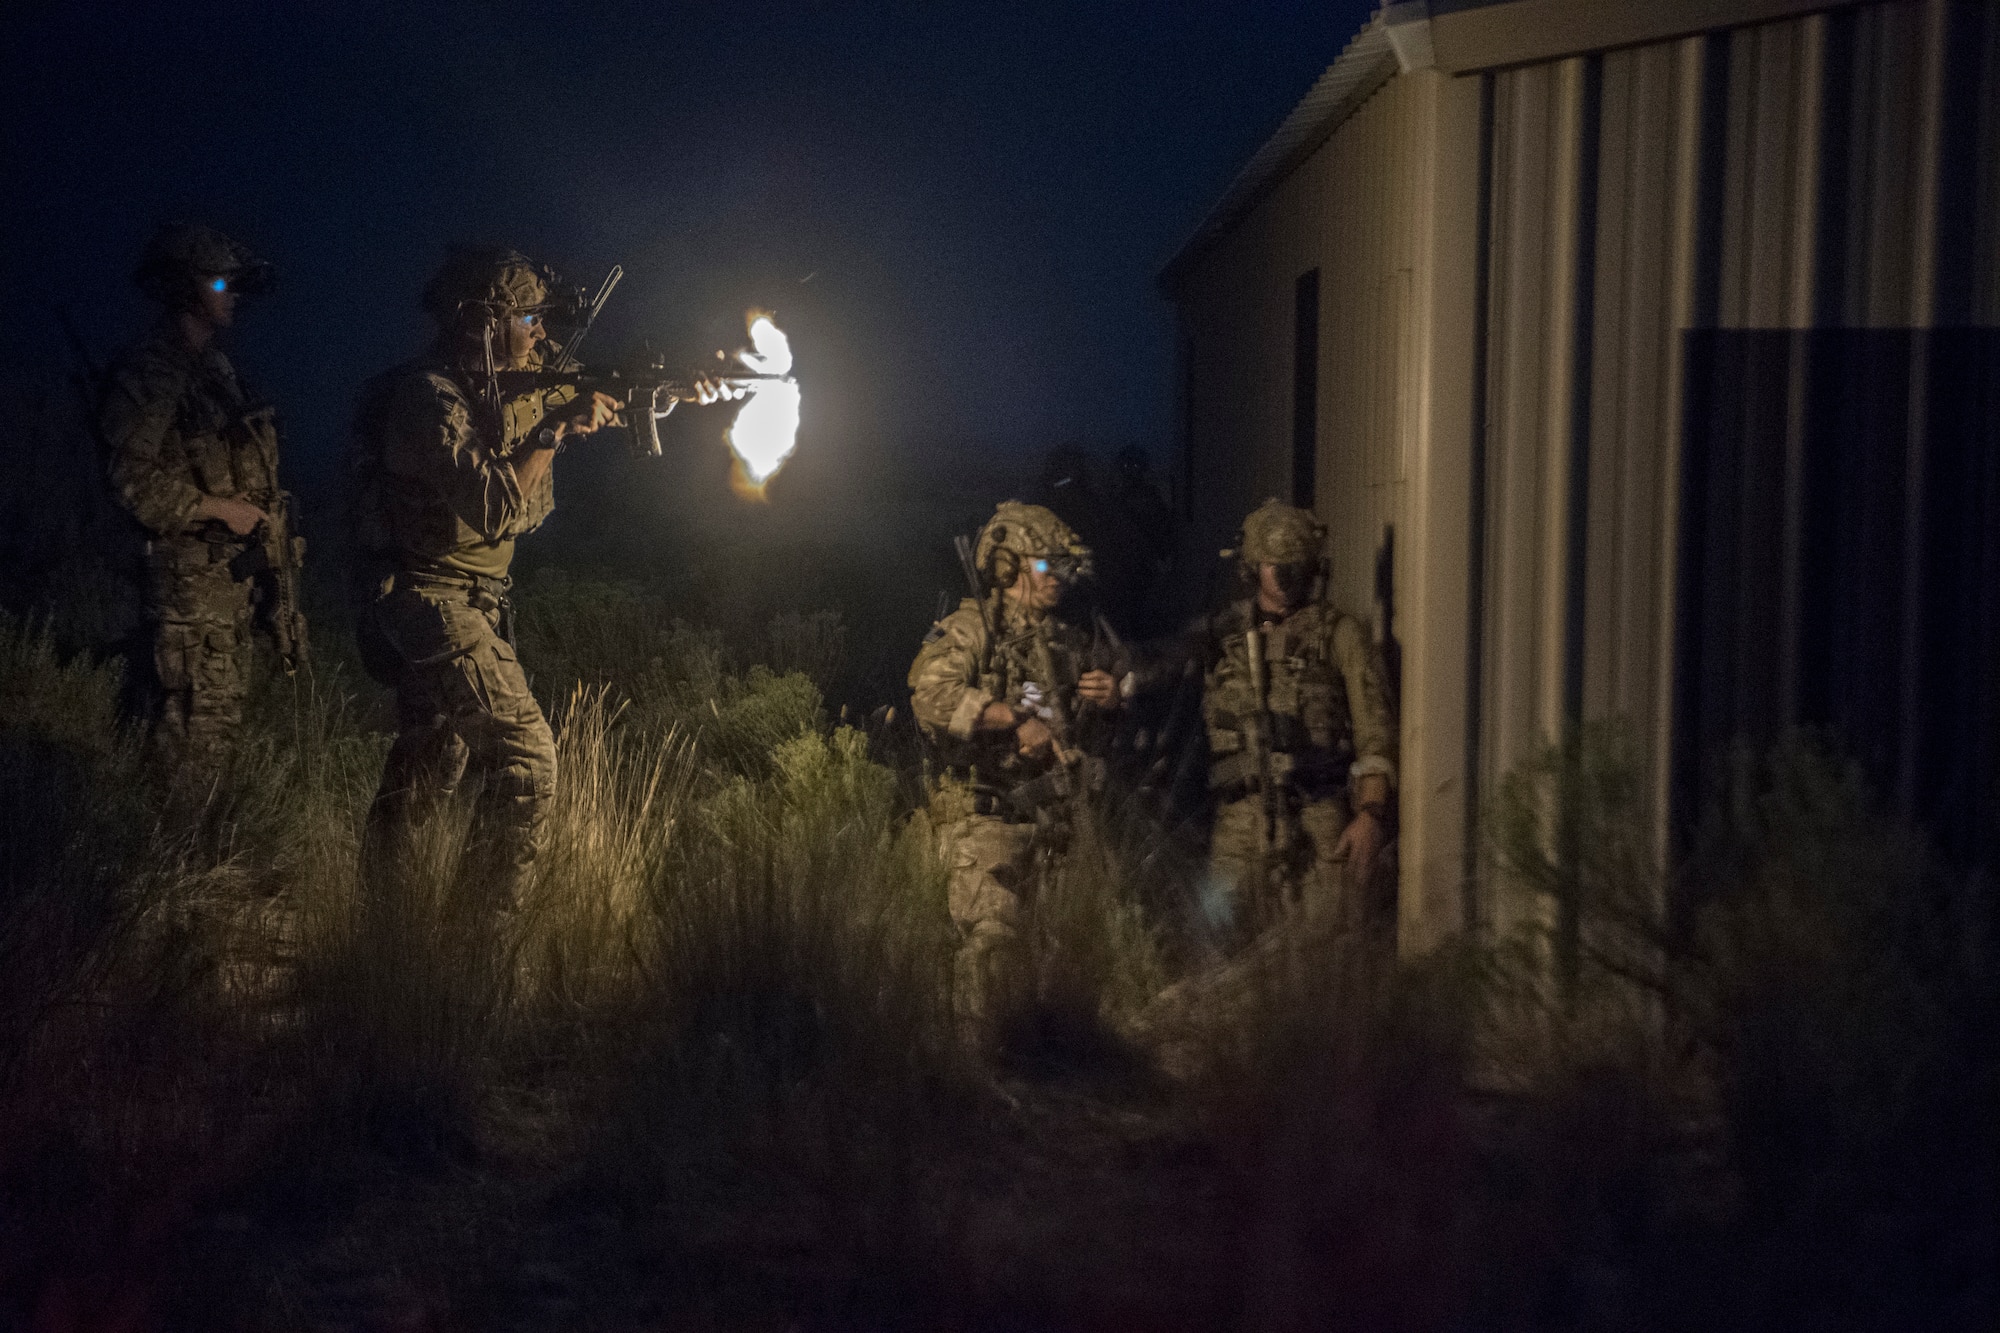 A Special Tactics Airman with the 17th Special Tactics Squadron fires an M4 carbine during Jaded Thunder at Mountain Home Air Force Base, Idaho, Aug. 20, 2018.